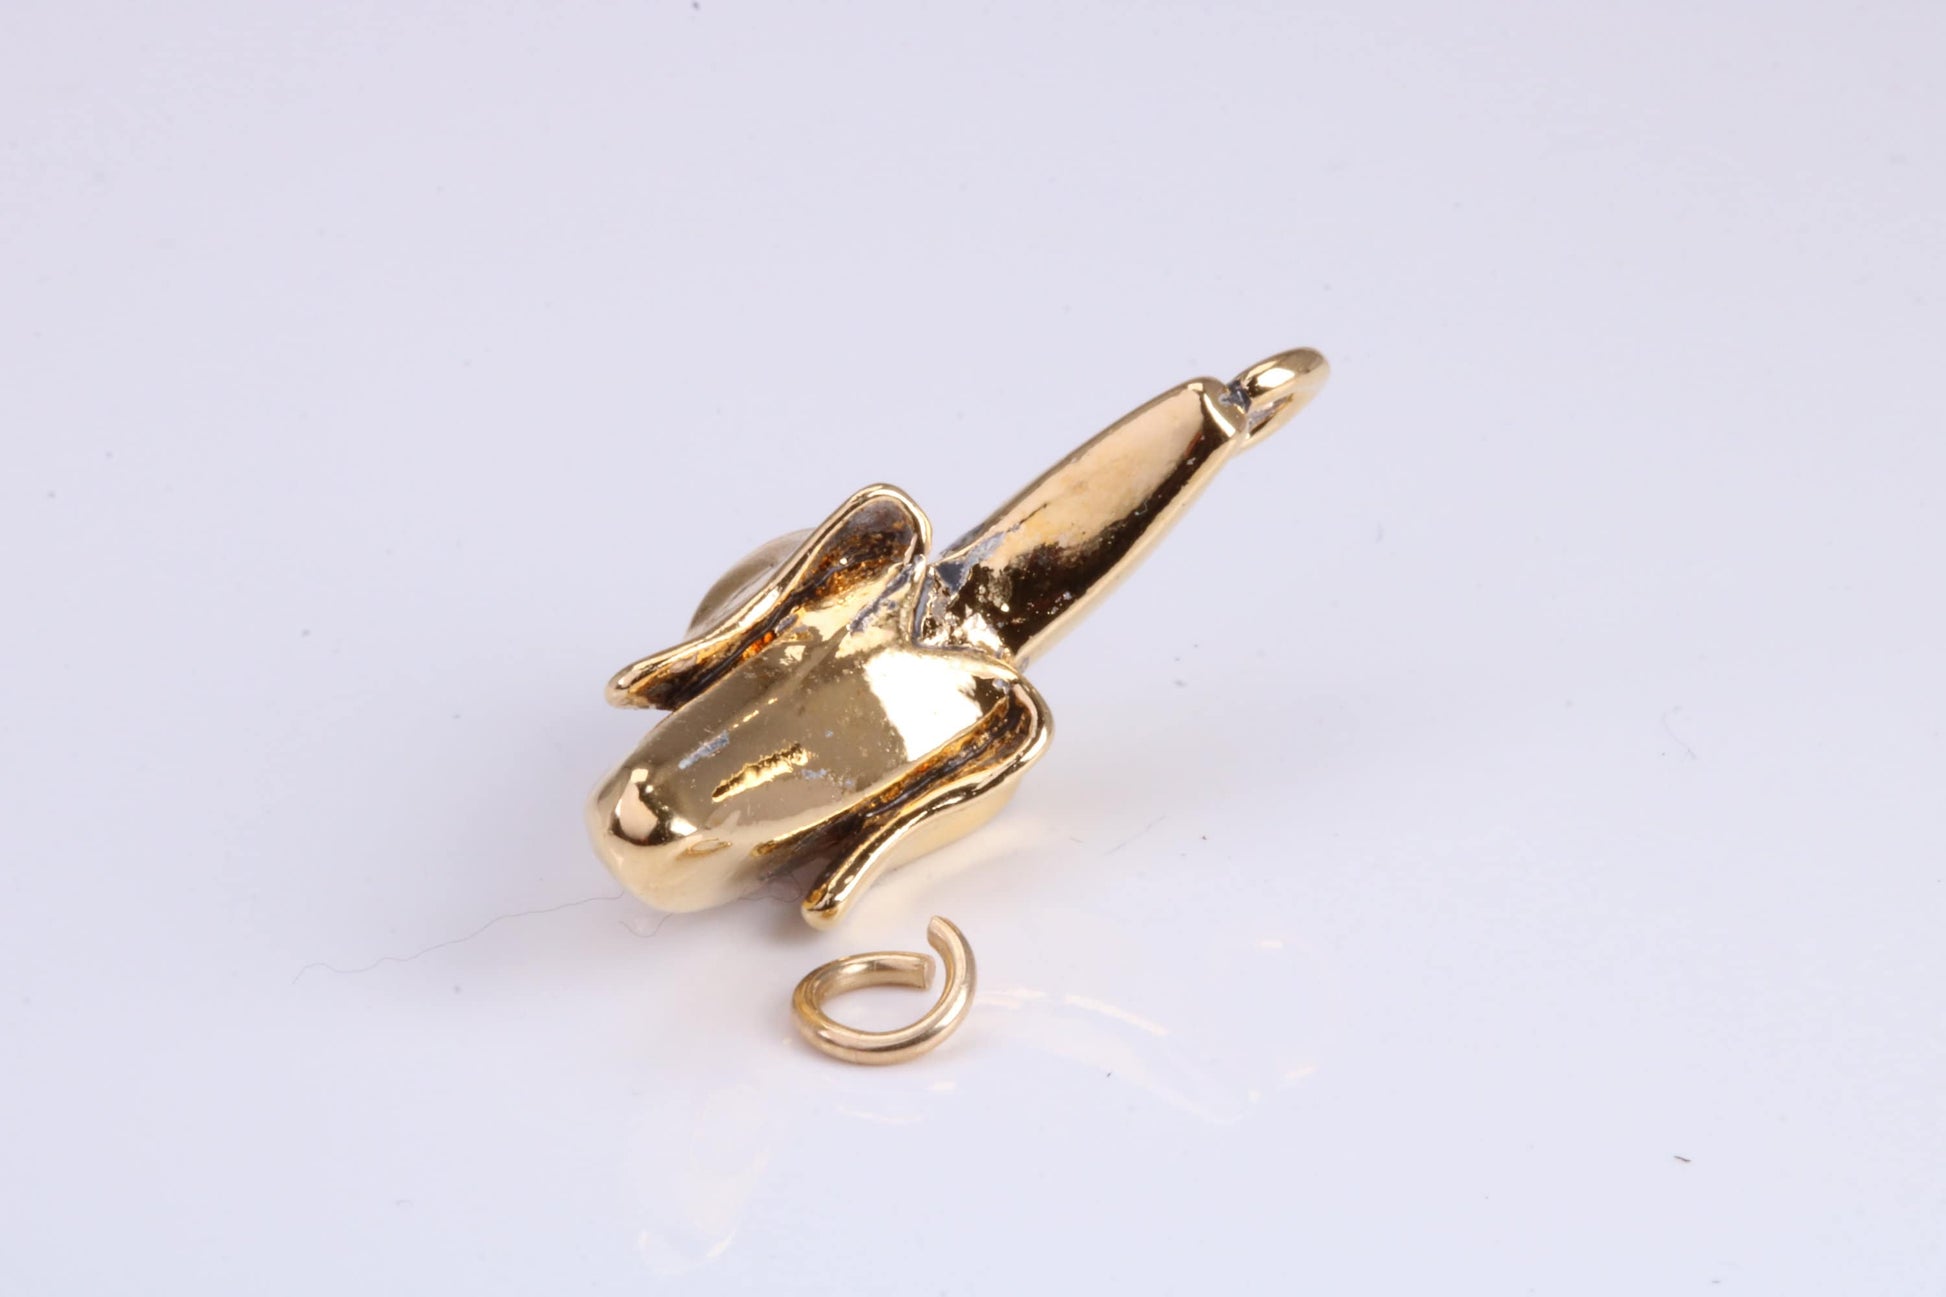 Banana Charm, Traditional Charm, Made from Solid Yellow Gold, British Hallmarked, Complete with Attachment Link